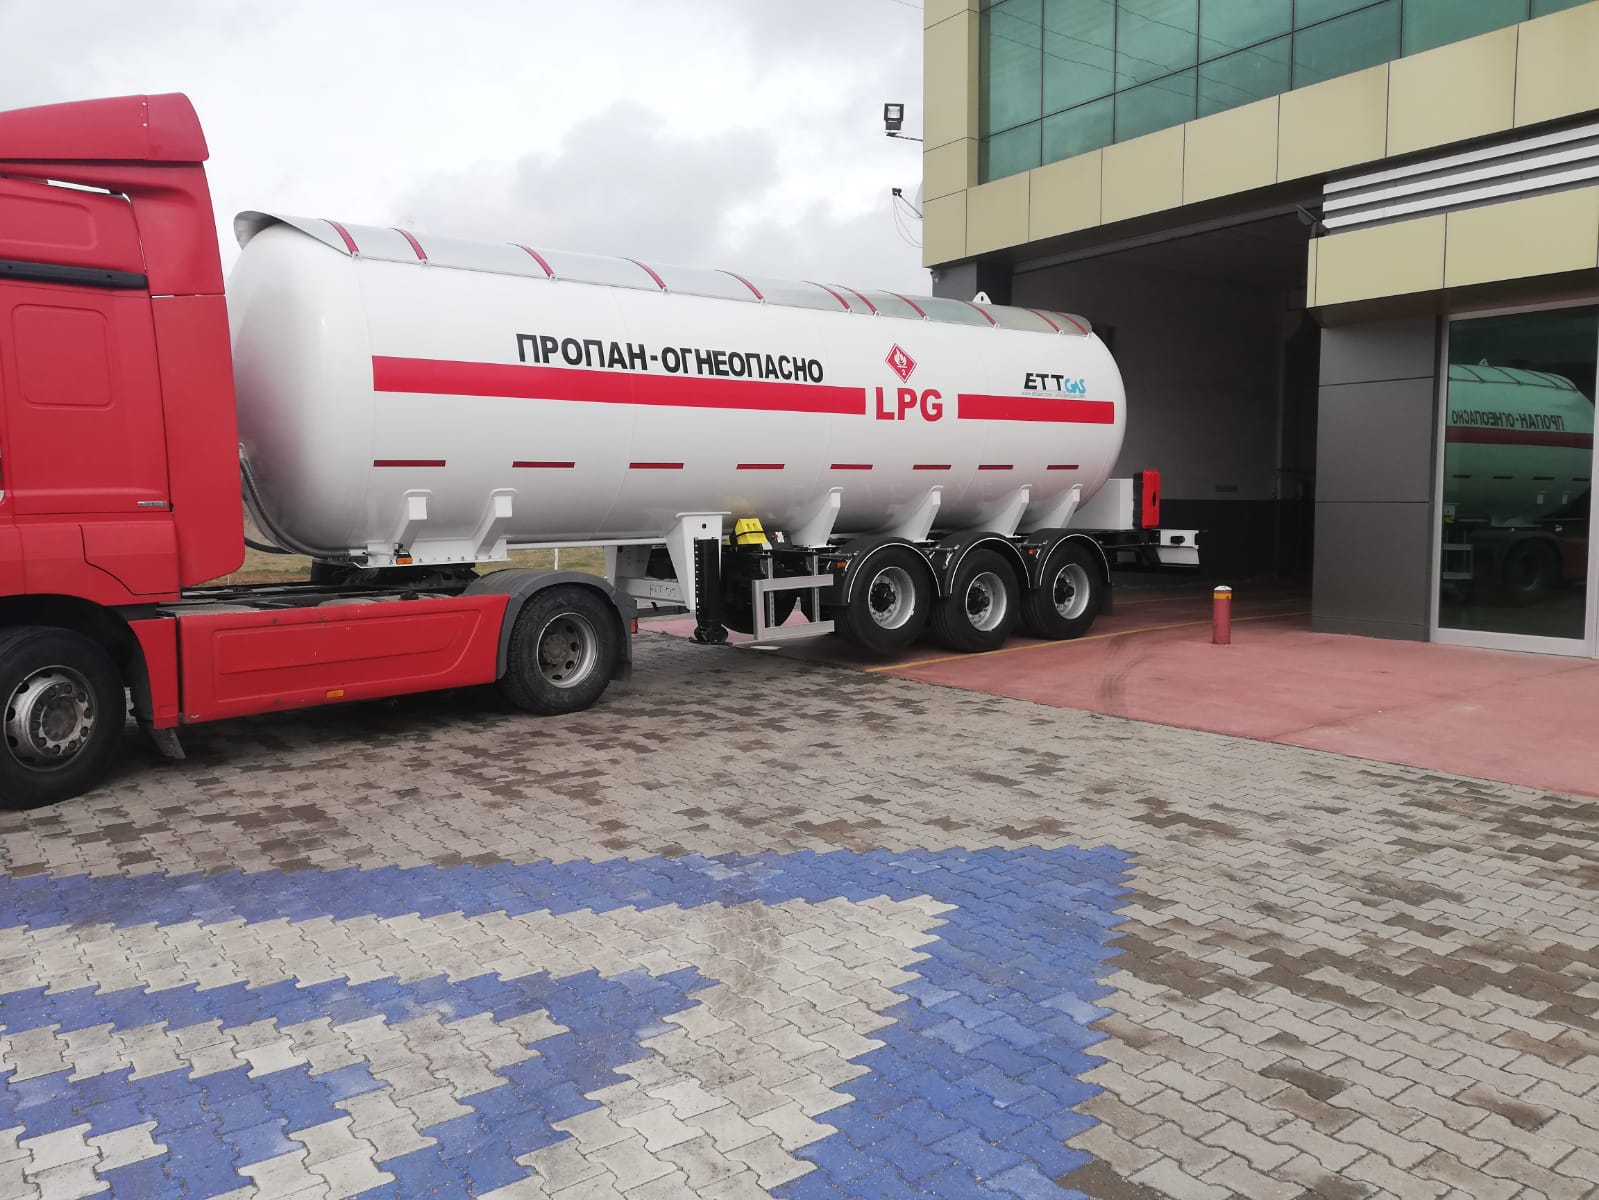 16.04.2019 Another 40 m3 Lpg Trailer delivery to Kazakhistan